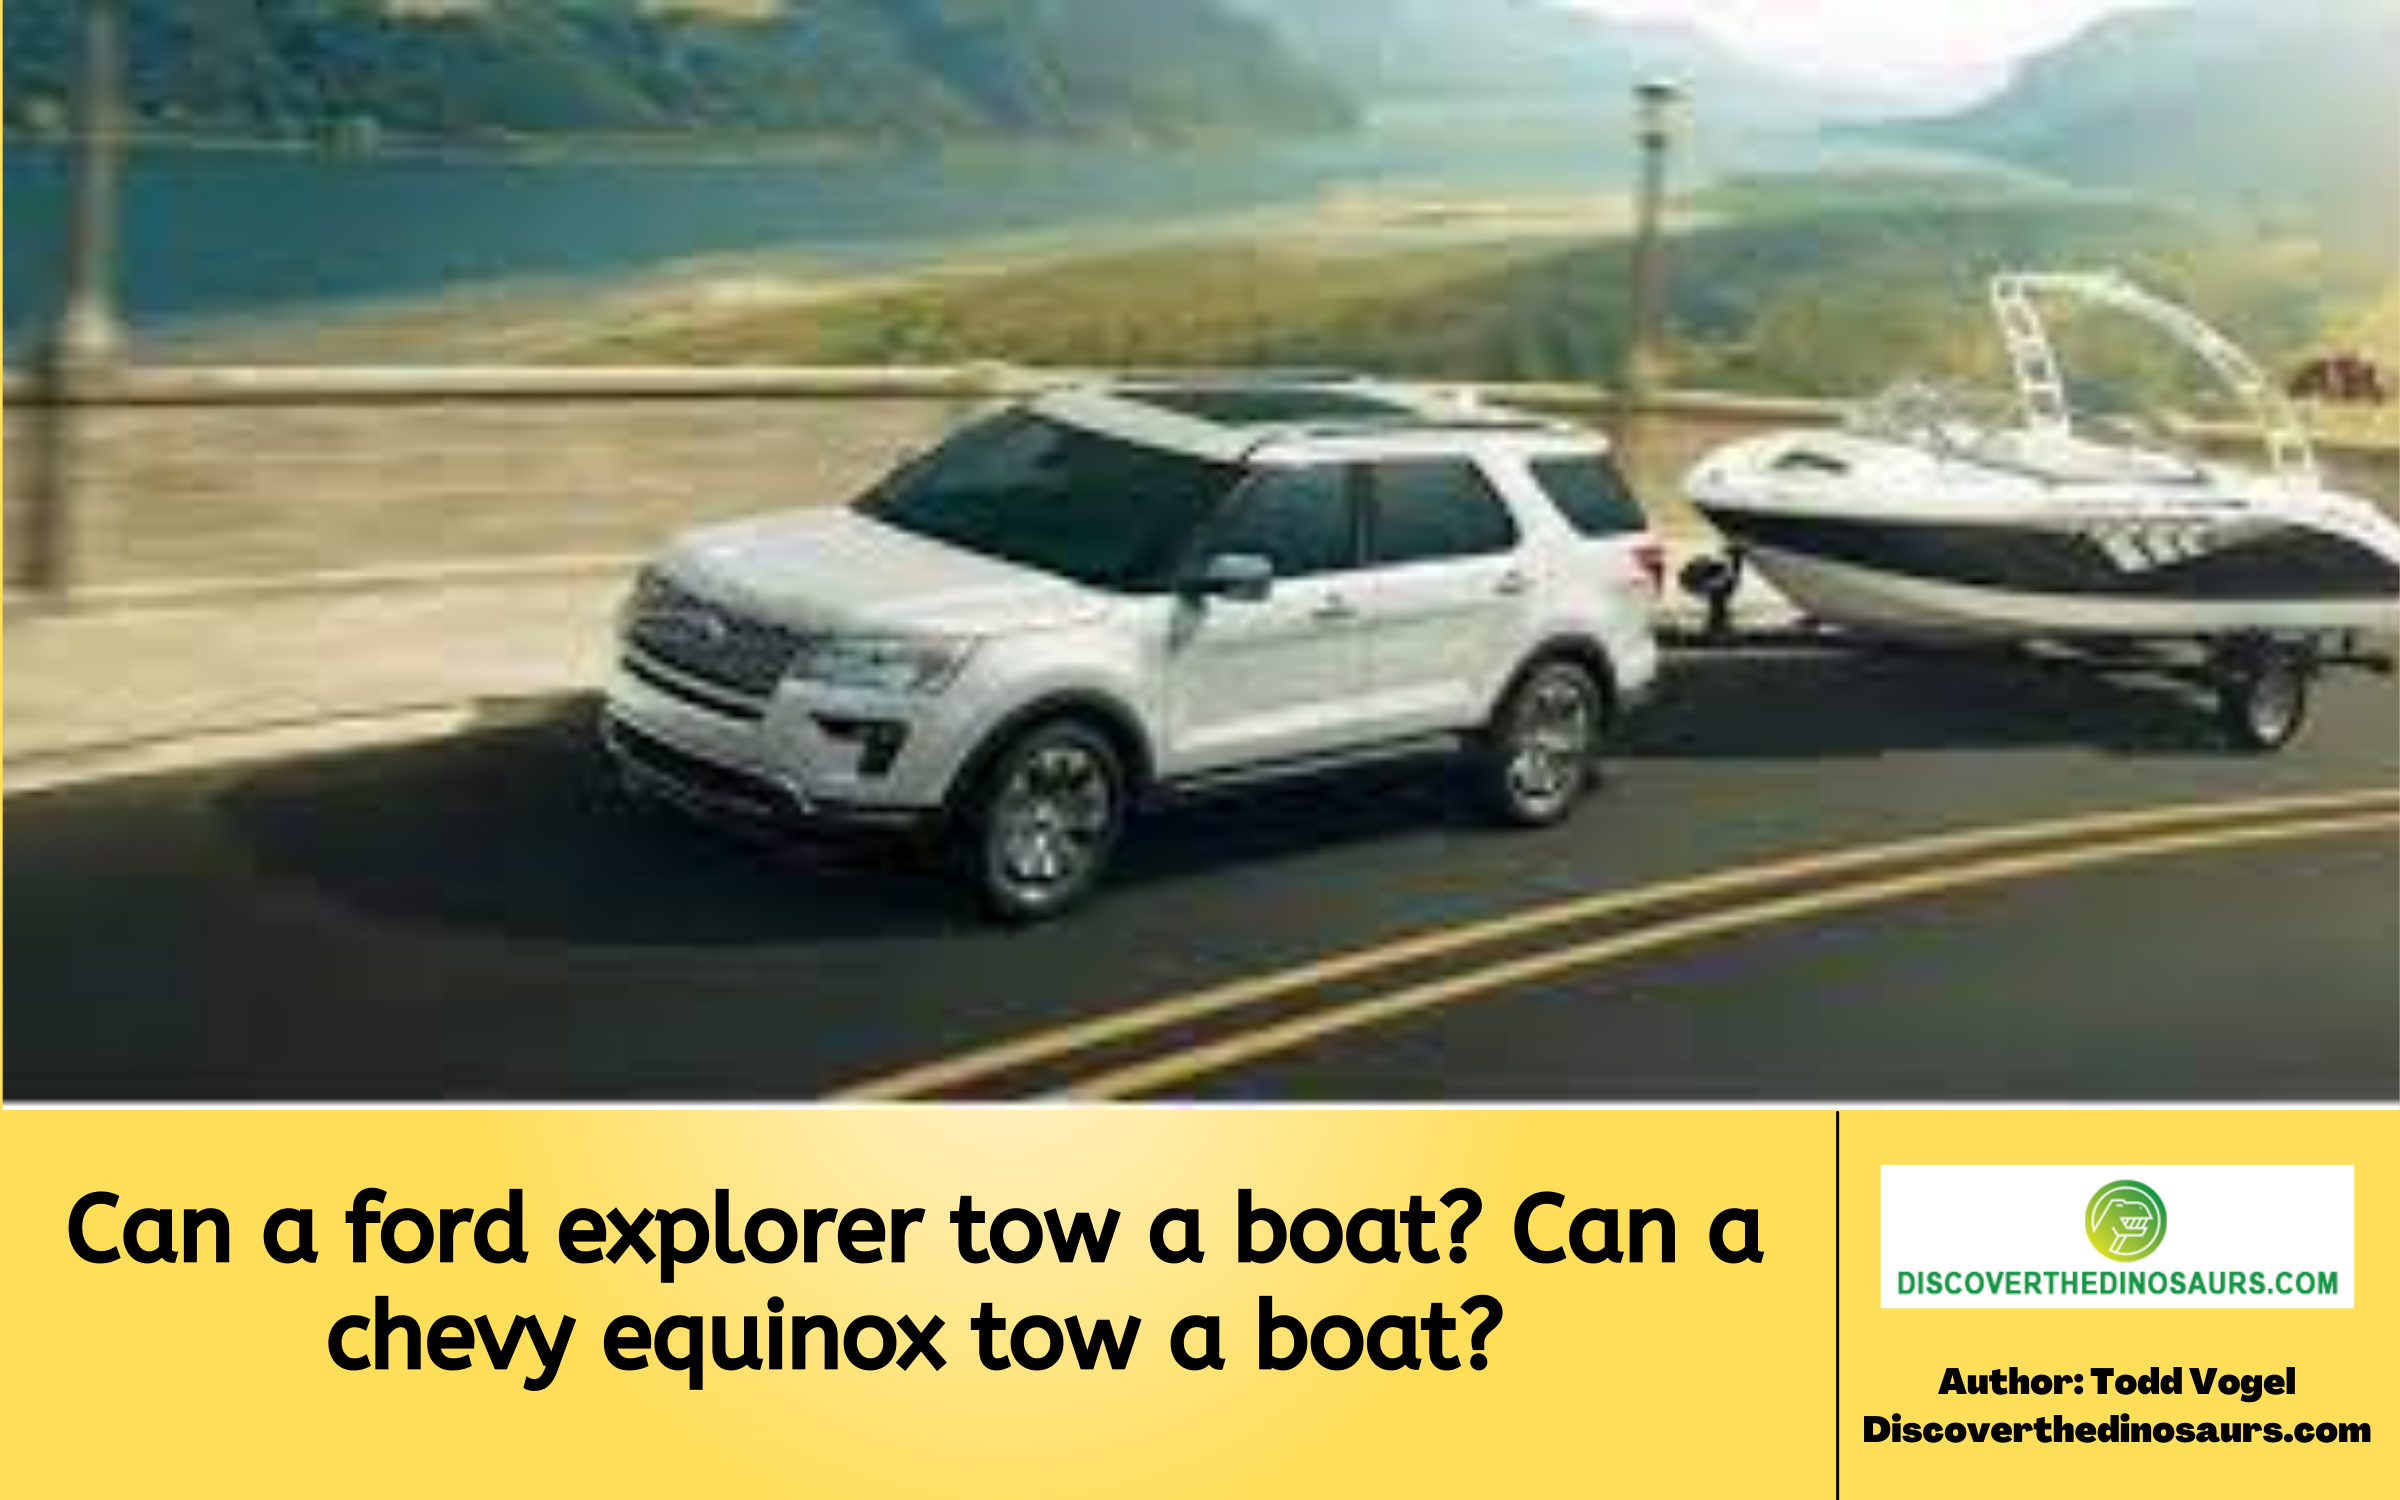 Can a ford explorer tow a boat? Can a chevy equinox tow a boat?